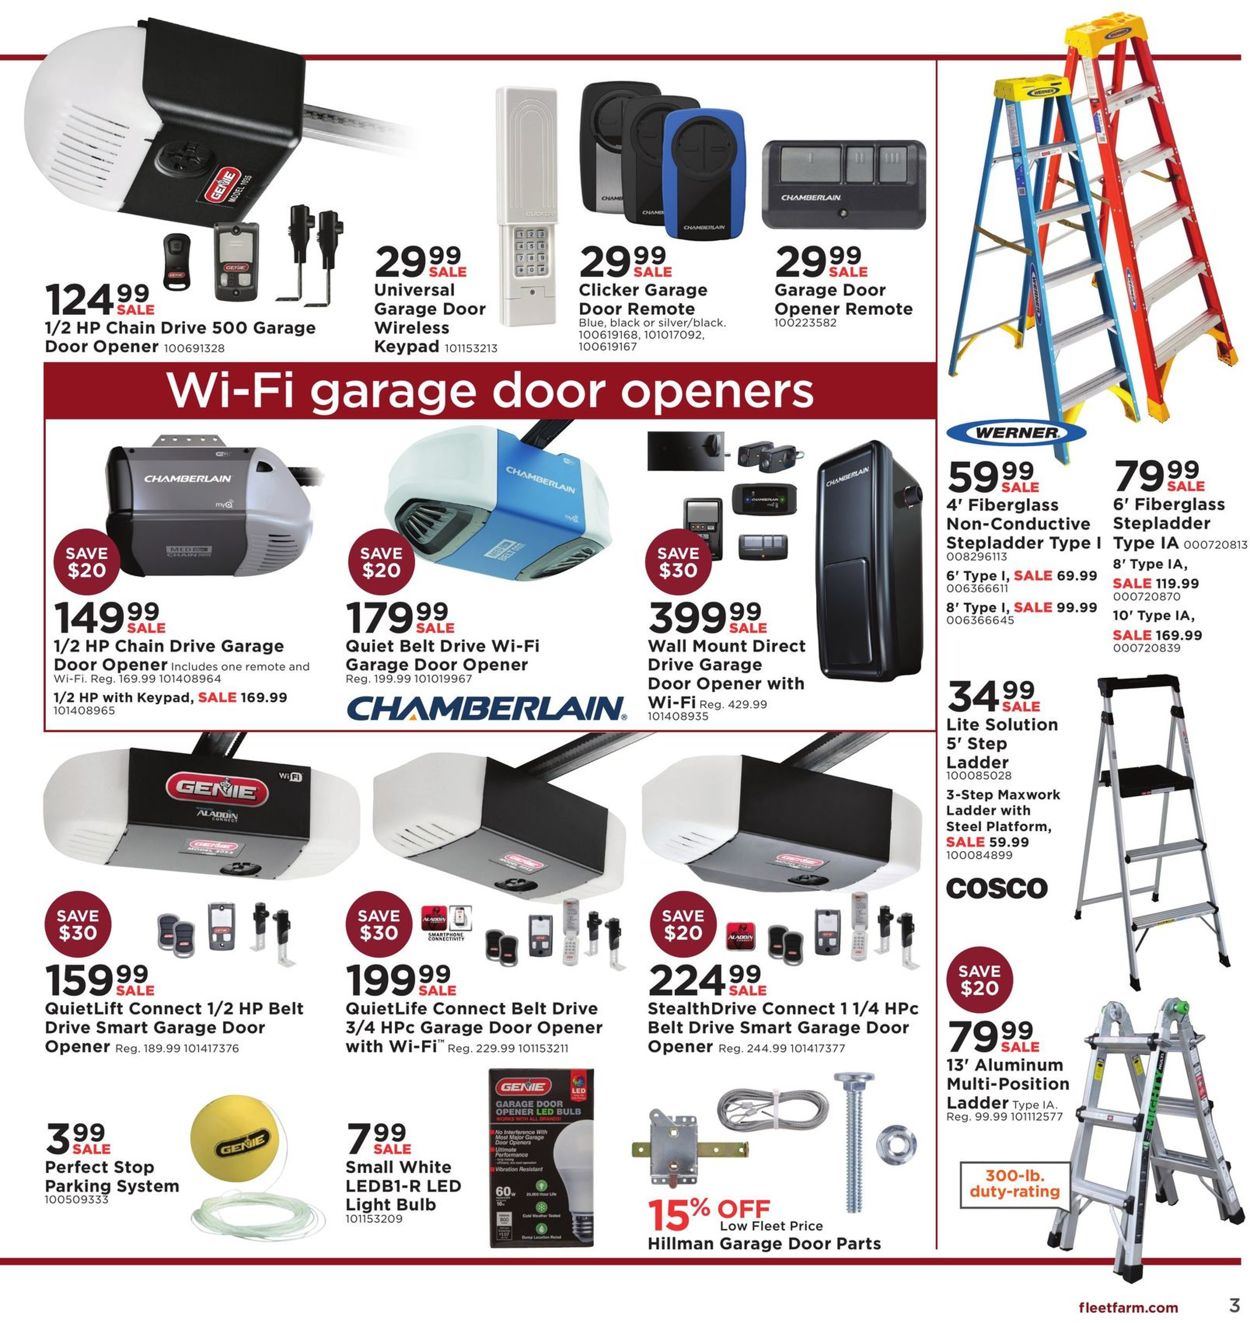 Mills Fleet Farm Current weekly ad 03/01 - 03/14/2020 [3] - frequent ...